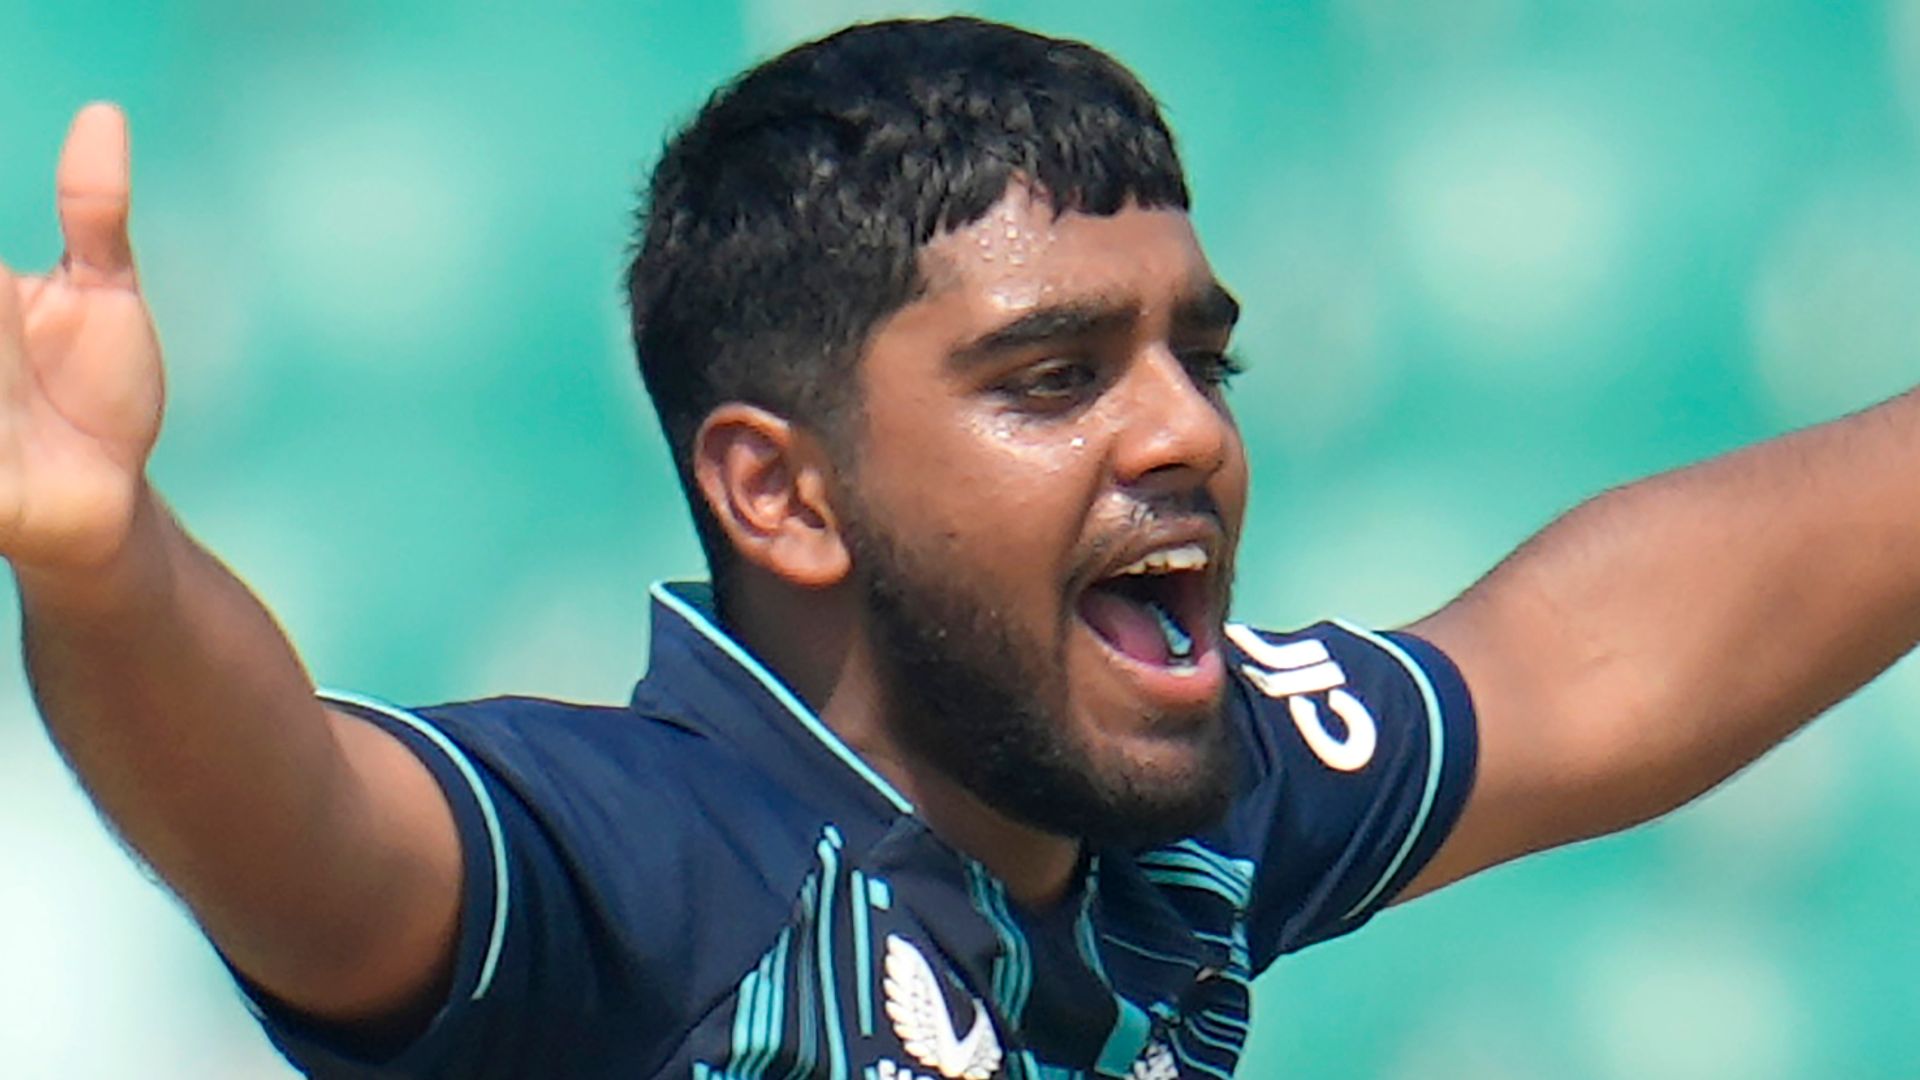 England spinner Ahmed withdraws from Big Bash League